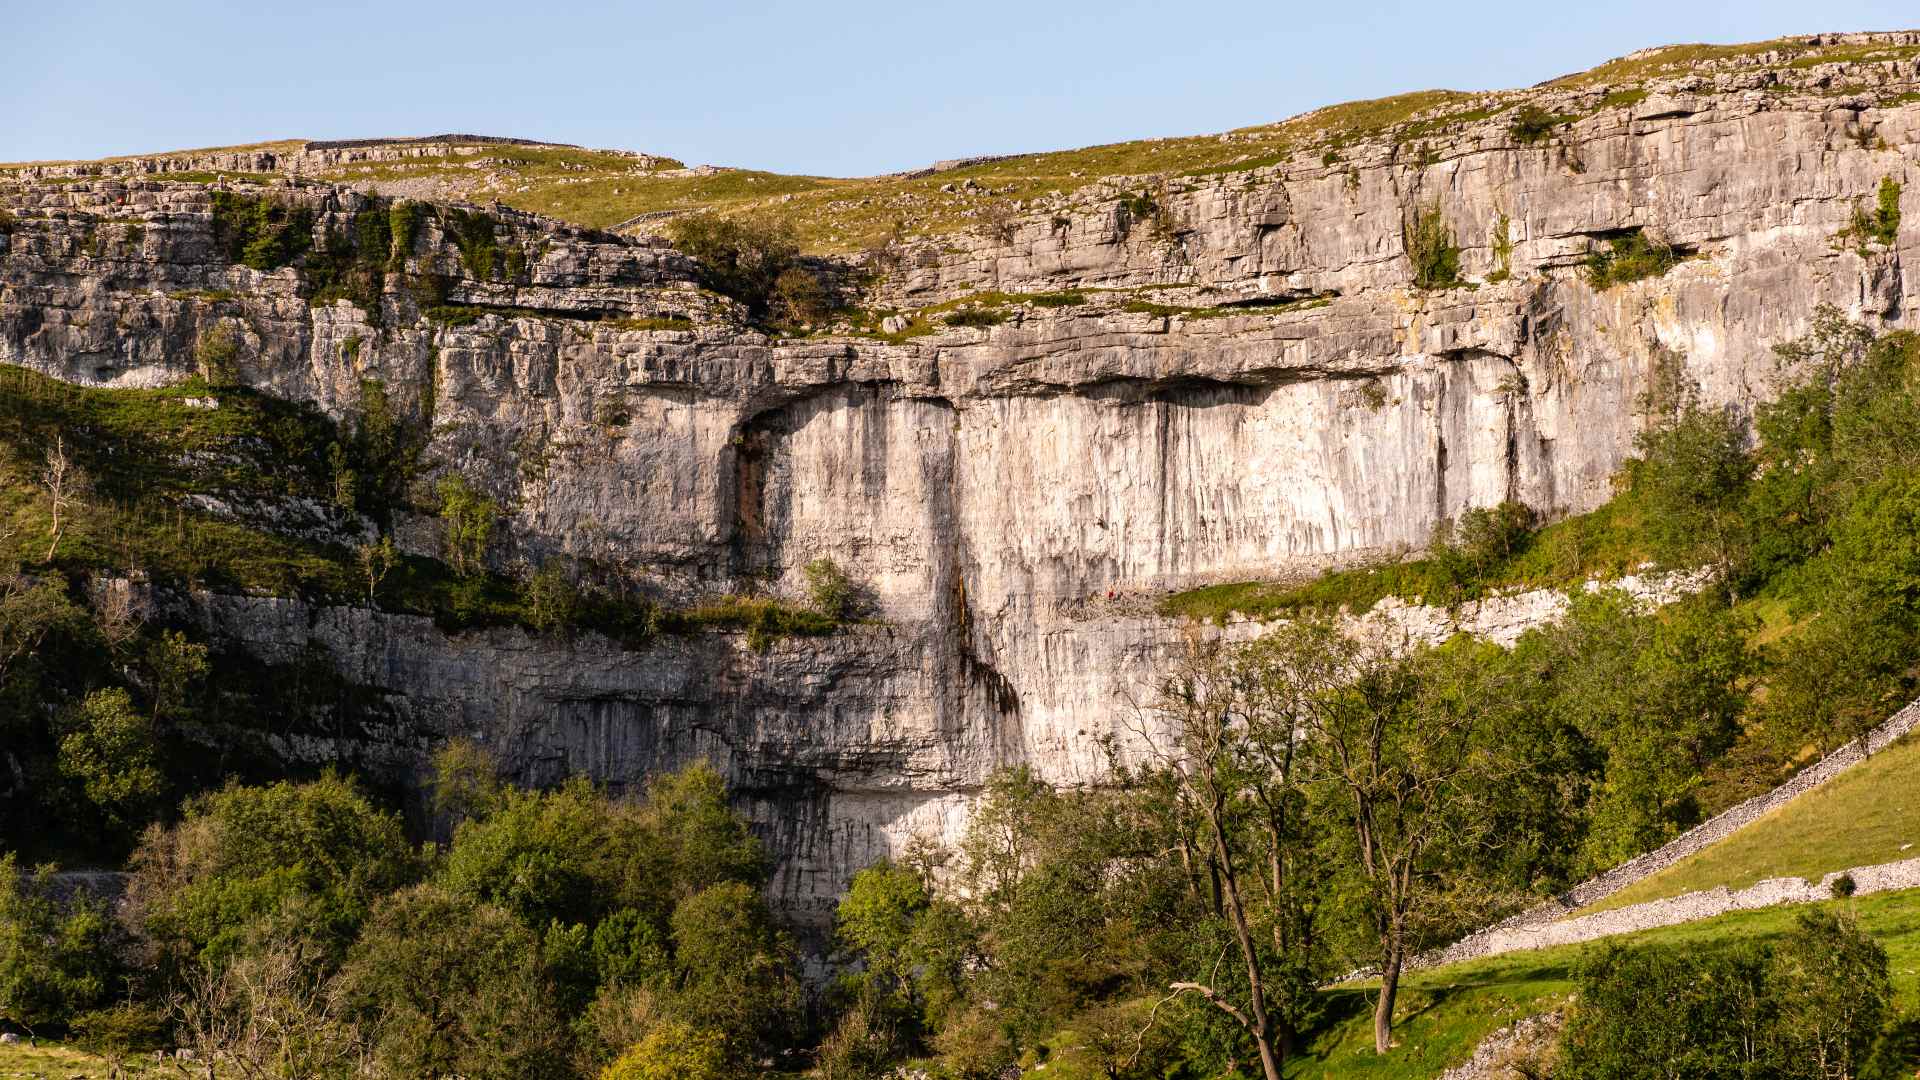 Malham Cove limestone cliff lit by the low summer sun